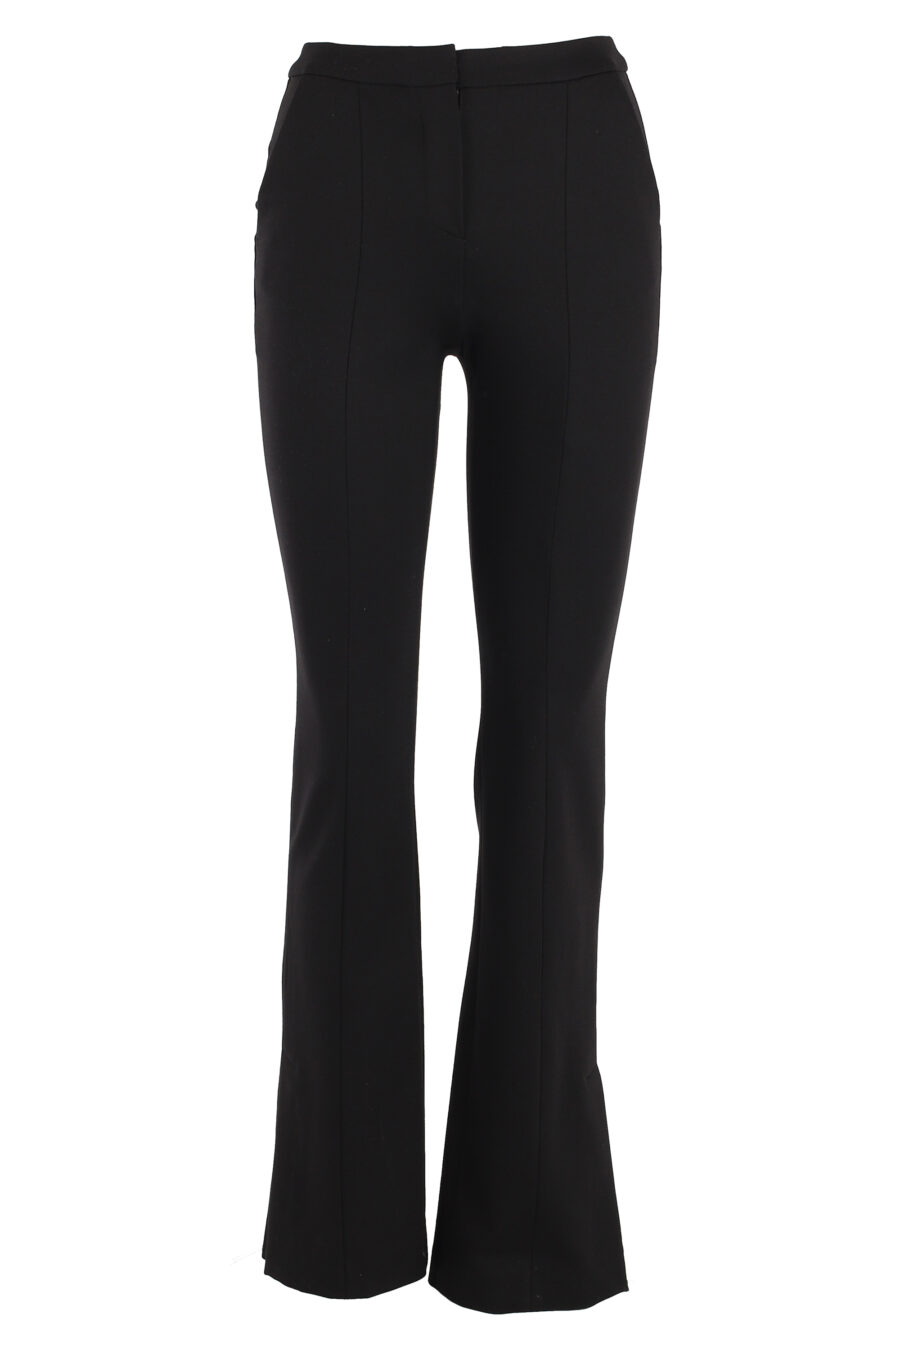 Black trousers with slit and ribbon logo - IMG 5096